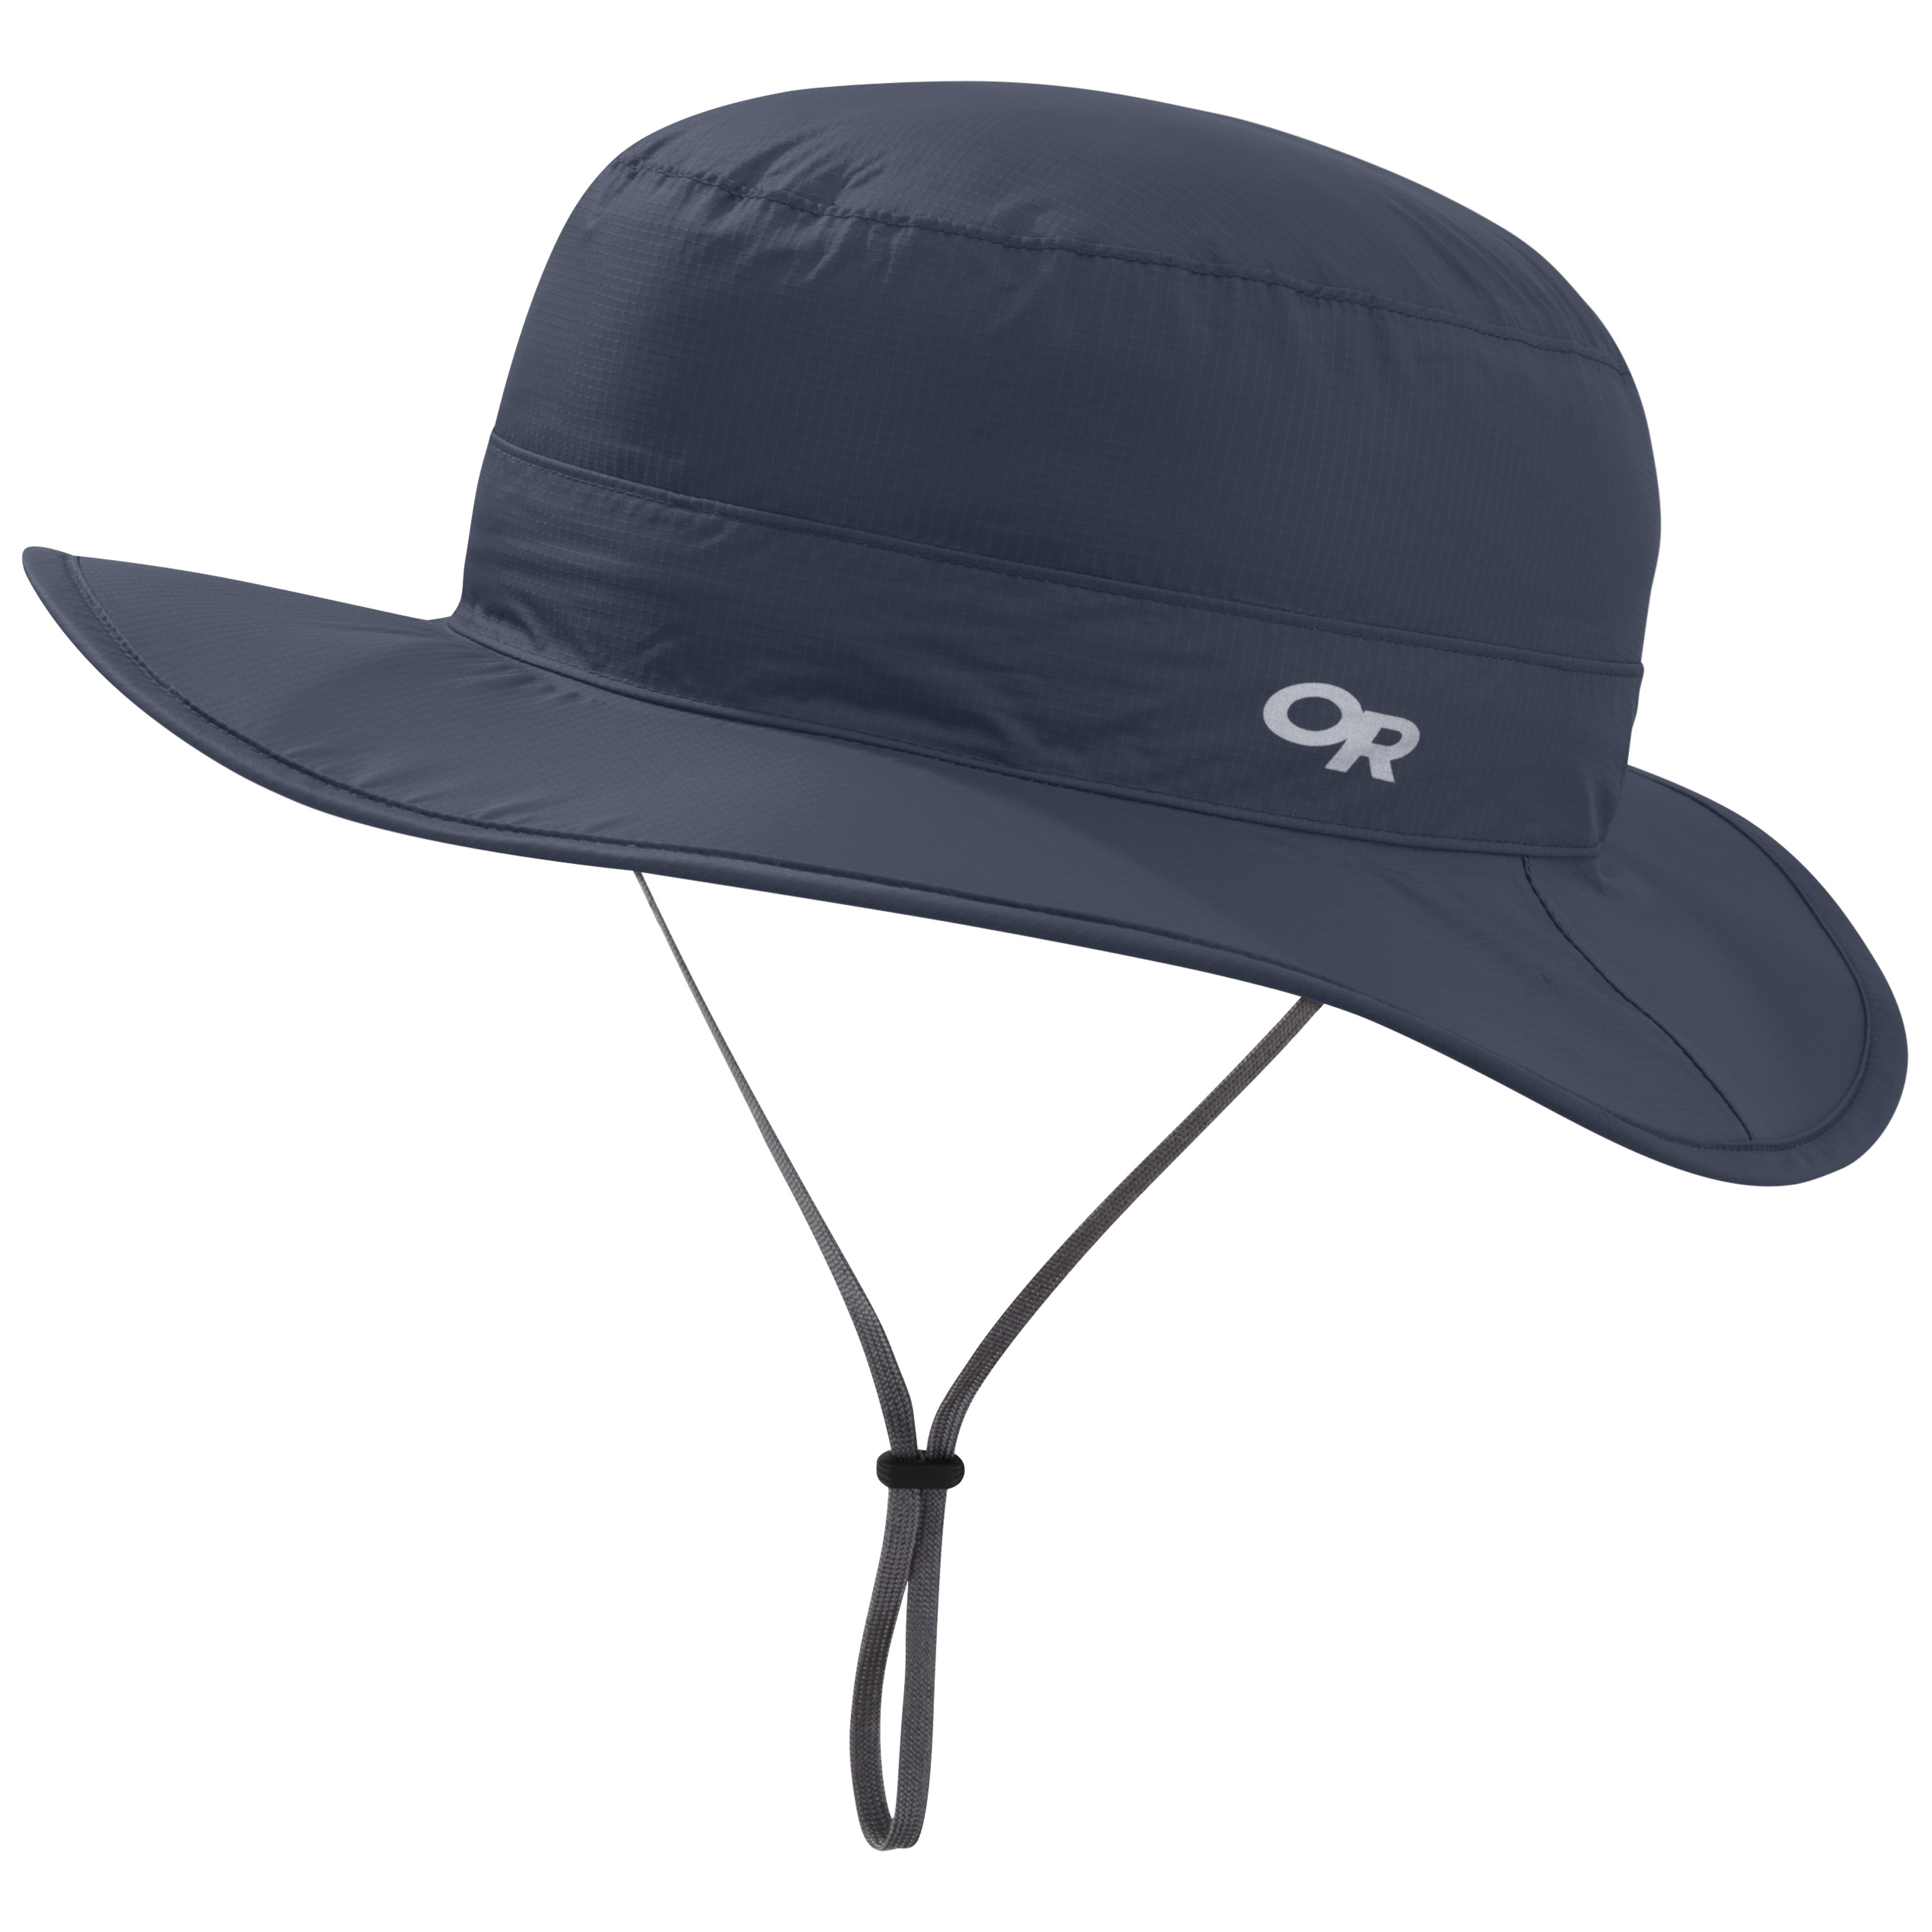 Outdoor Research "Cloud Forest Rain Hat" - night